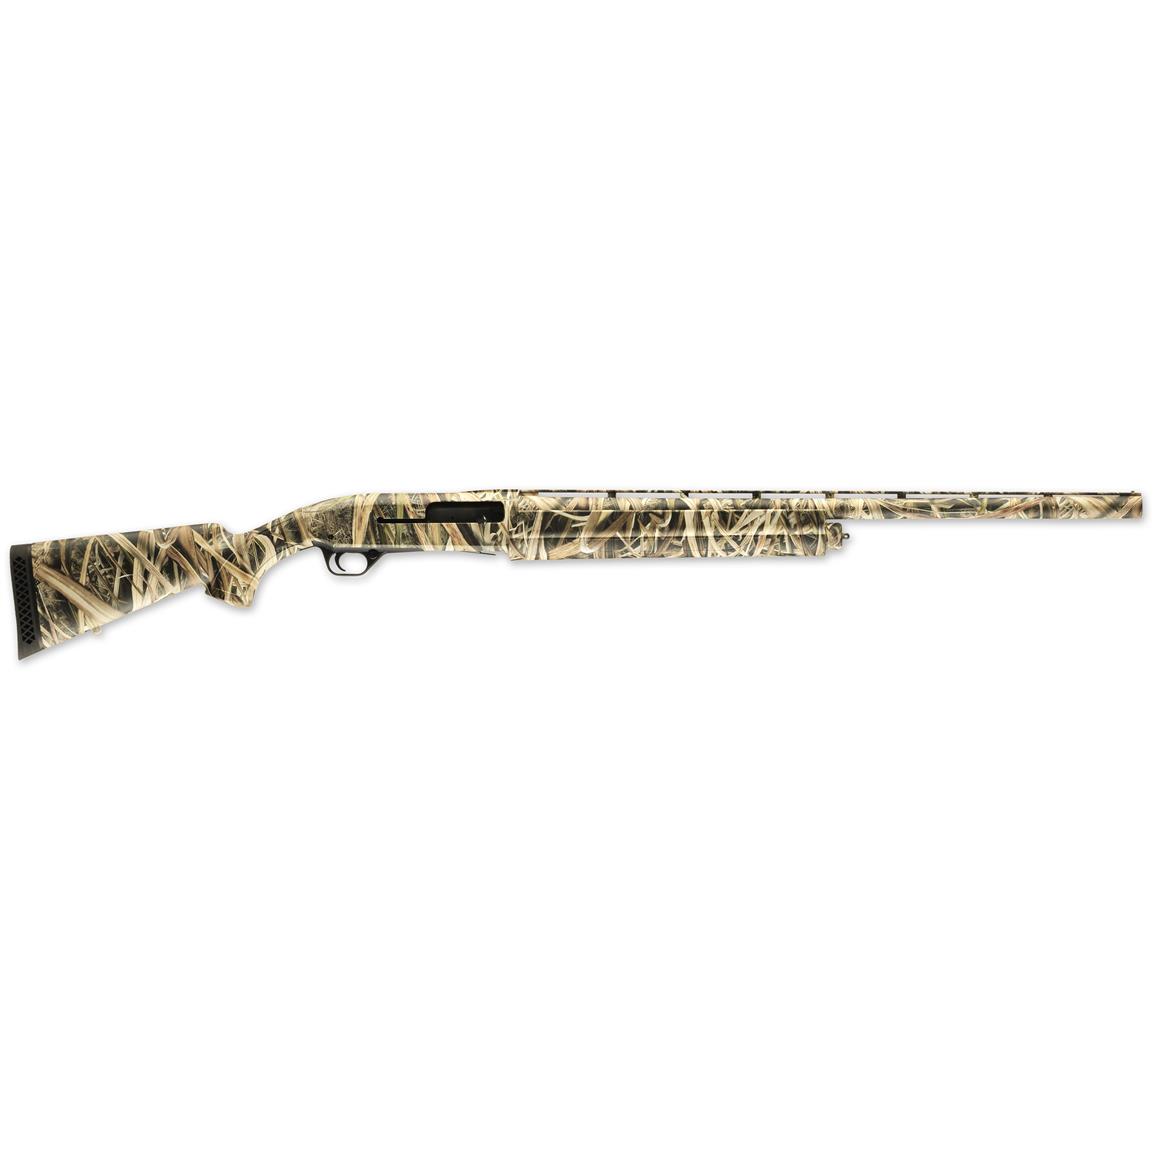 Browning Gold Light, Semi-Automatic, 10 Gauge, 28" Barrel, 4 1 Rounds